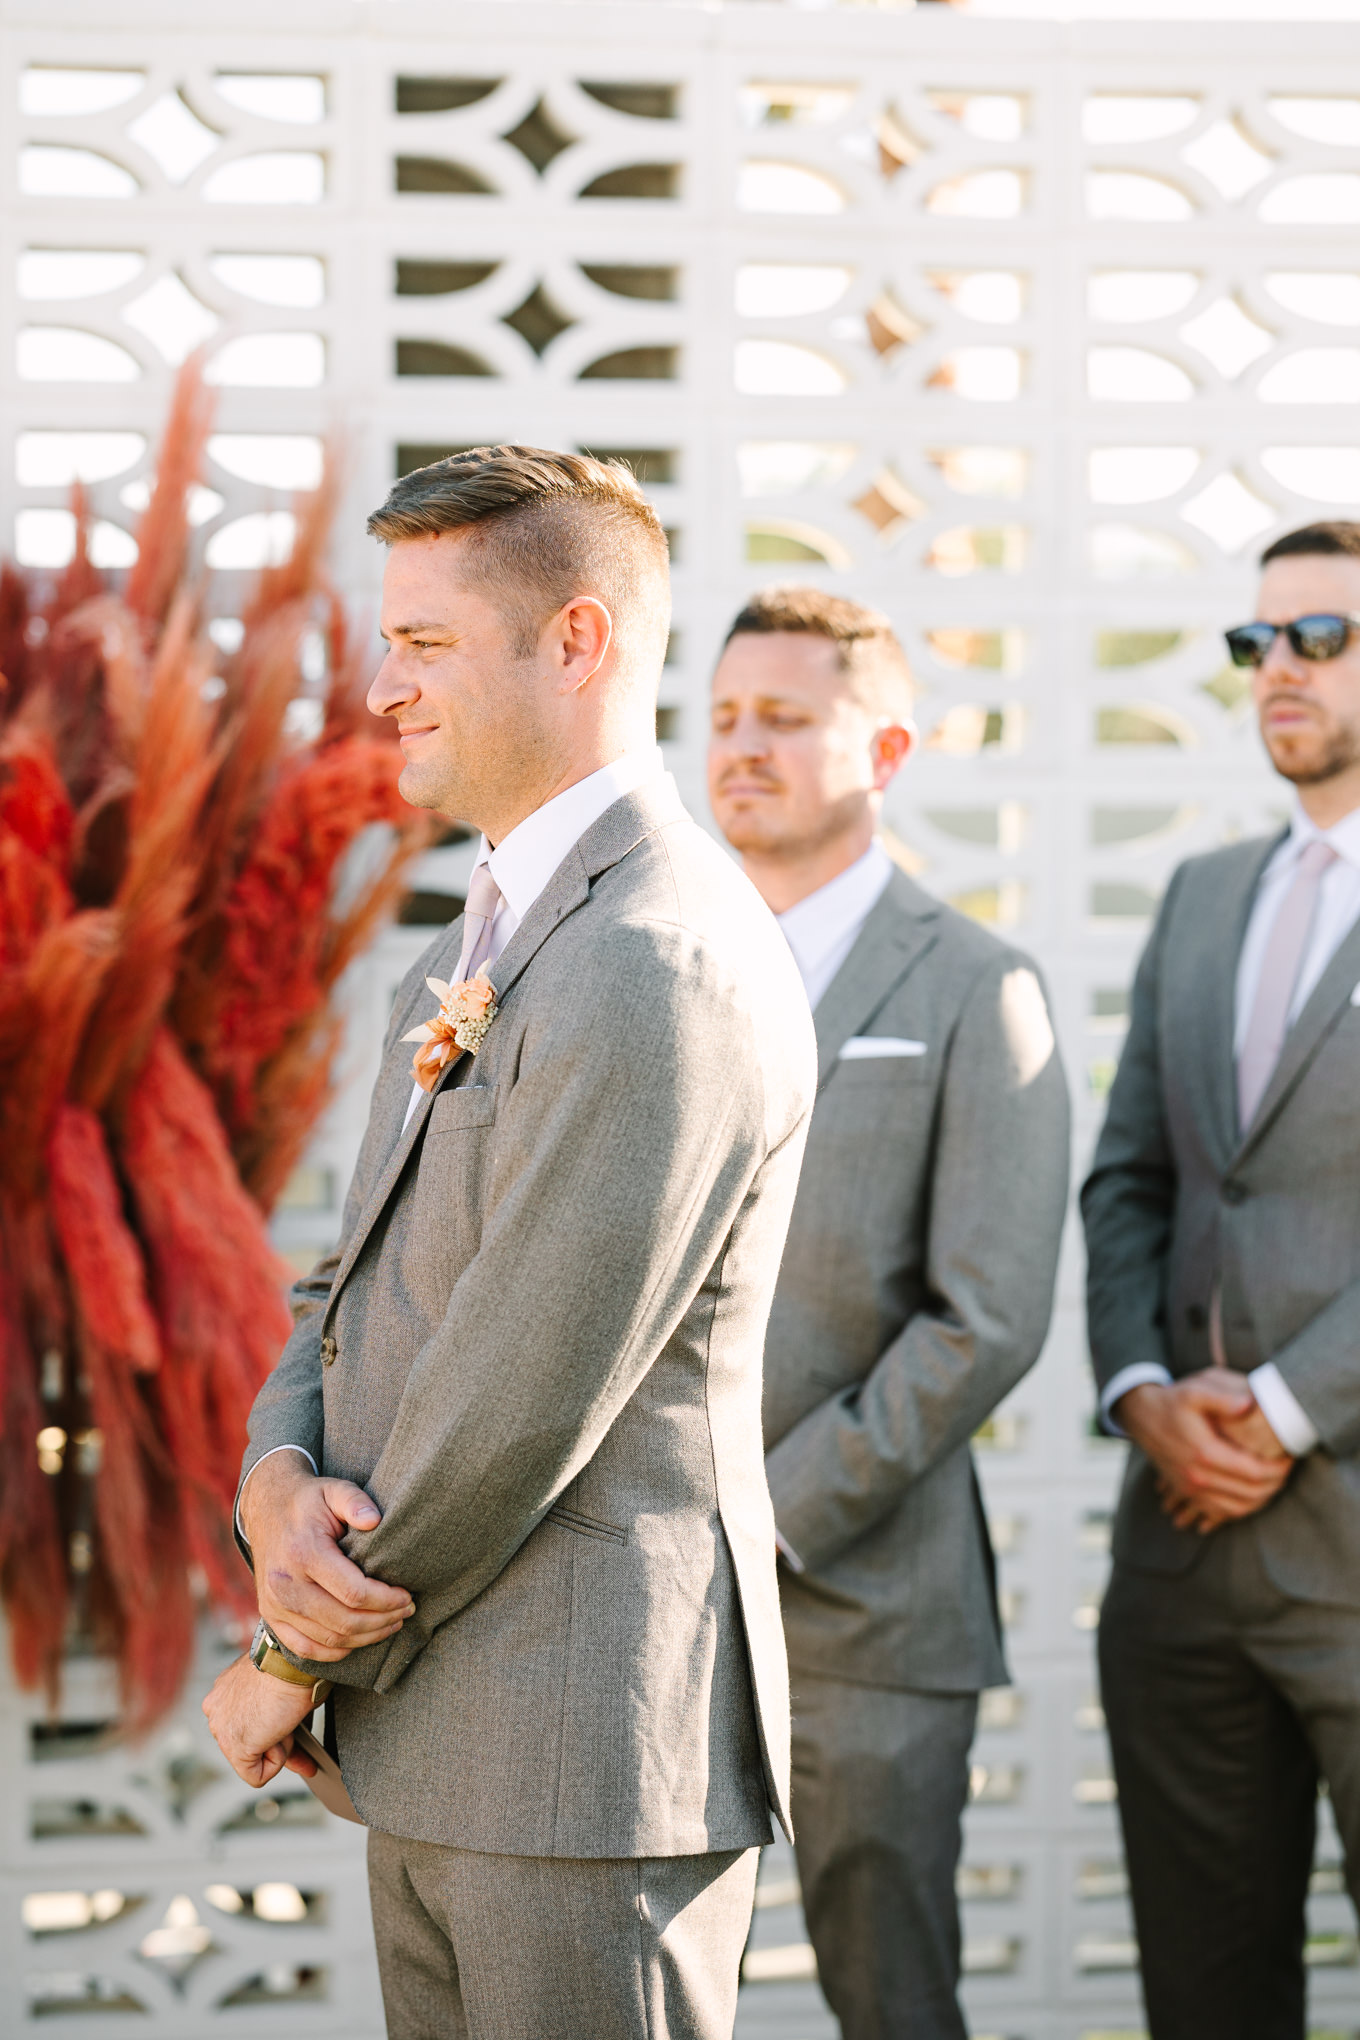 Groom listening to bride's vows | Pink and orange Lautner Compound wedding | Colorful Palm Springs wedding photography | #palmspringsphotographer #palmspringswedding #lautnercompound #southerncaliforniawedding  Source: Mary Costa Photography | Los Angeles